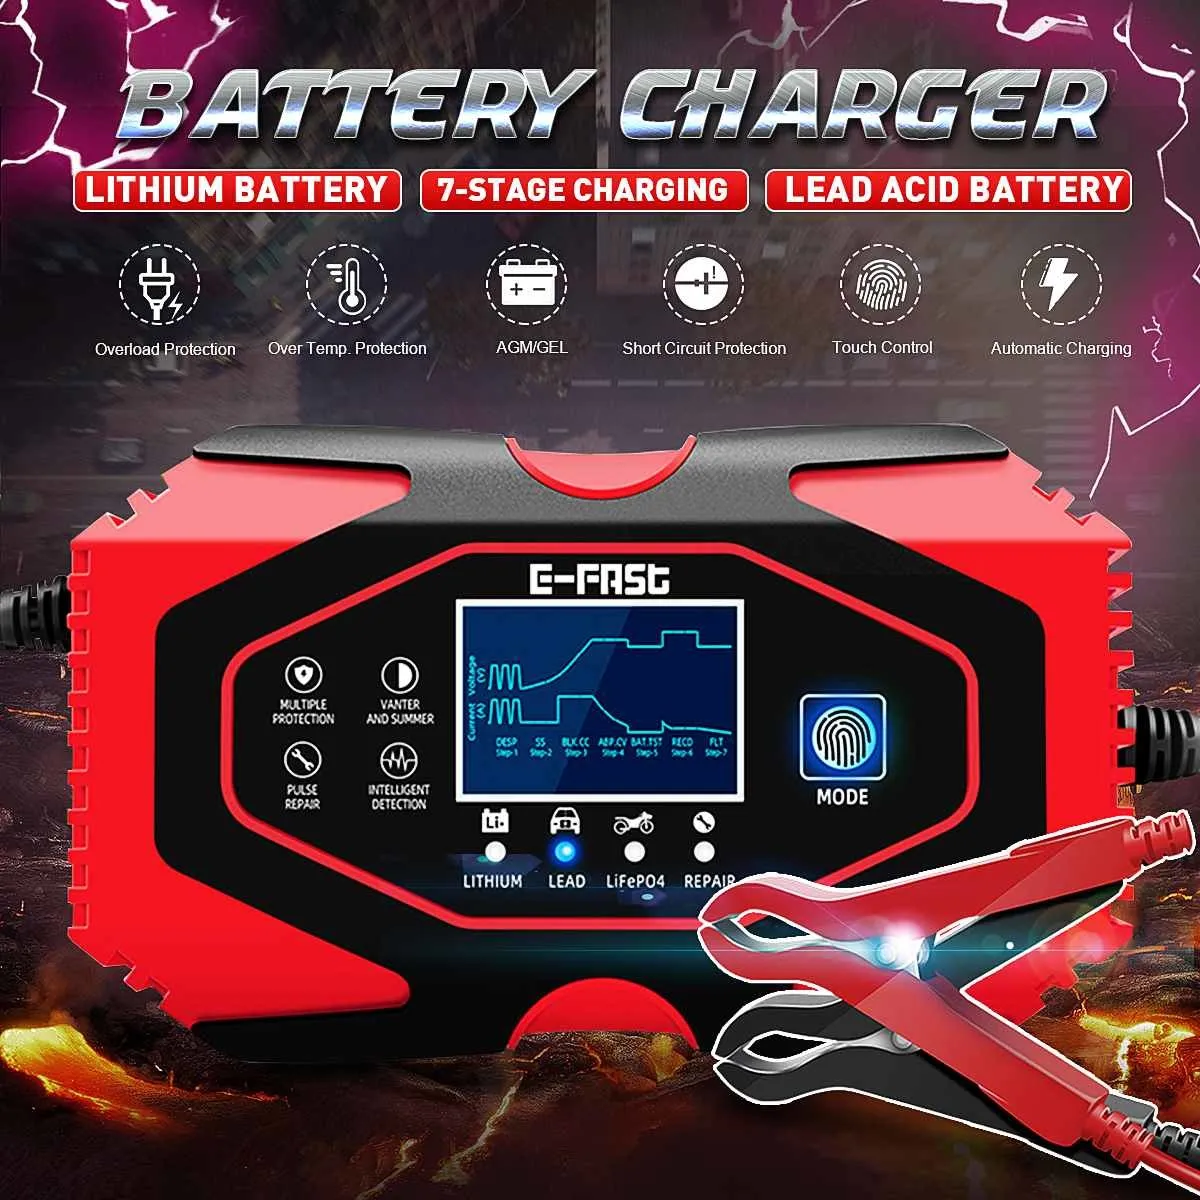 12V-24V 8A Carregador de Carregador de Carregador de Carregador de Carregador Automático Carregador de Pulso de Pulso de Pulso Molhado Wet Dry Chumbo Battery Chargers 7-Stage Carregando